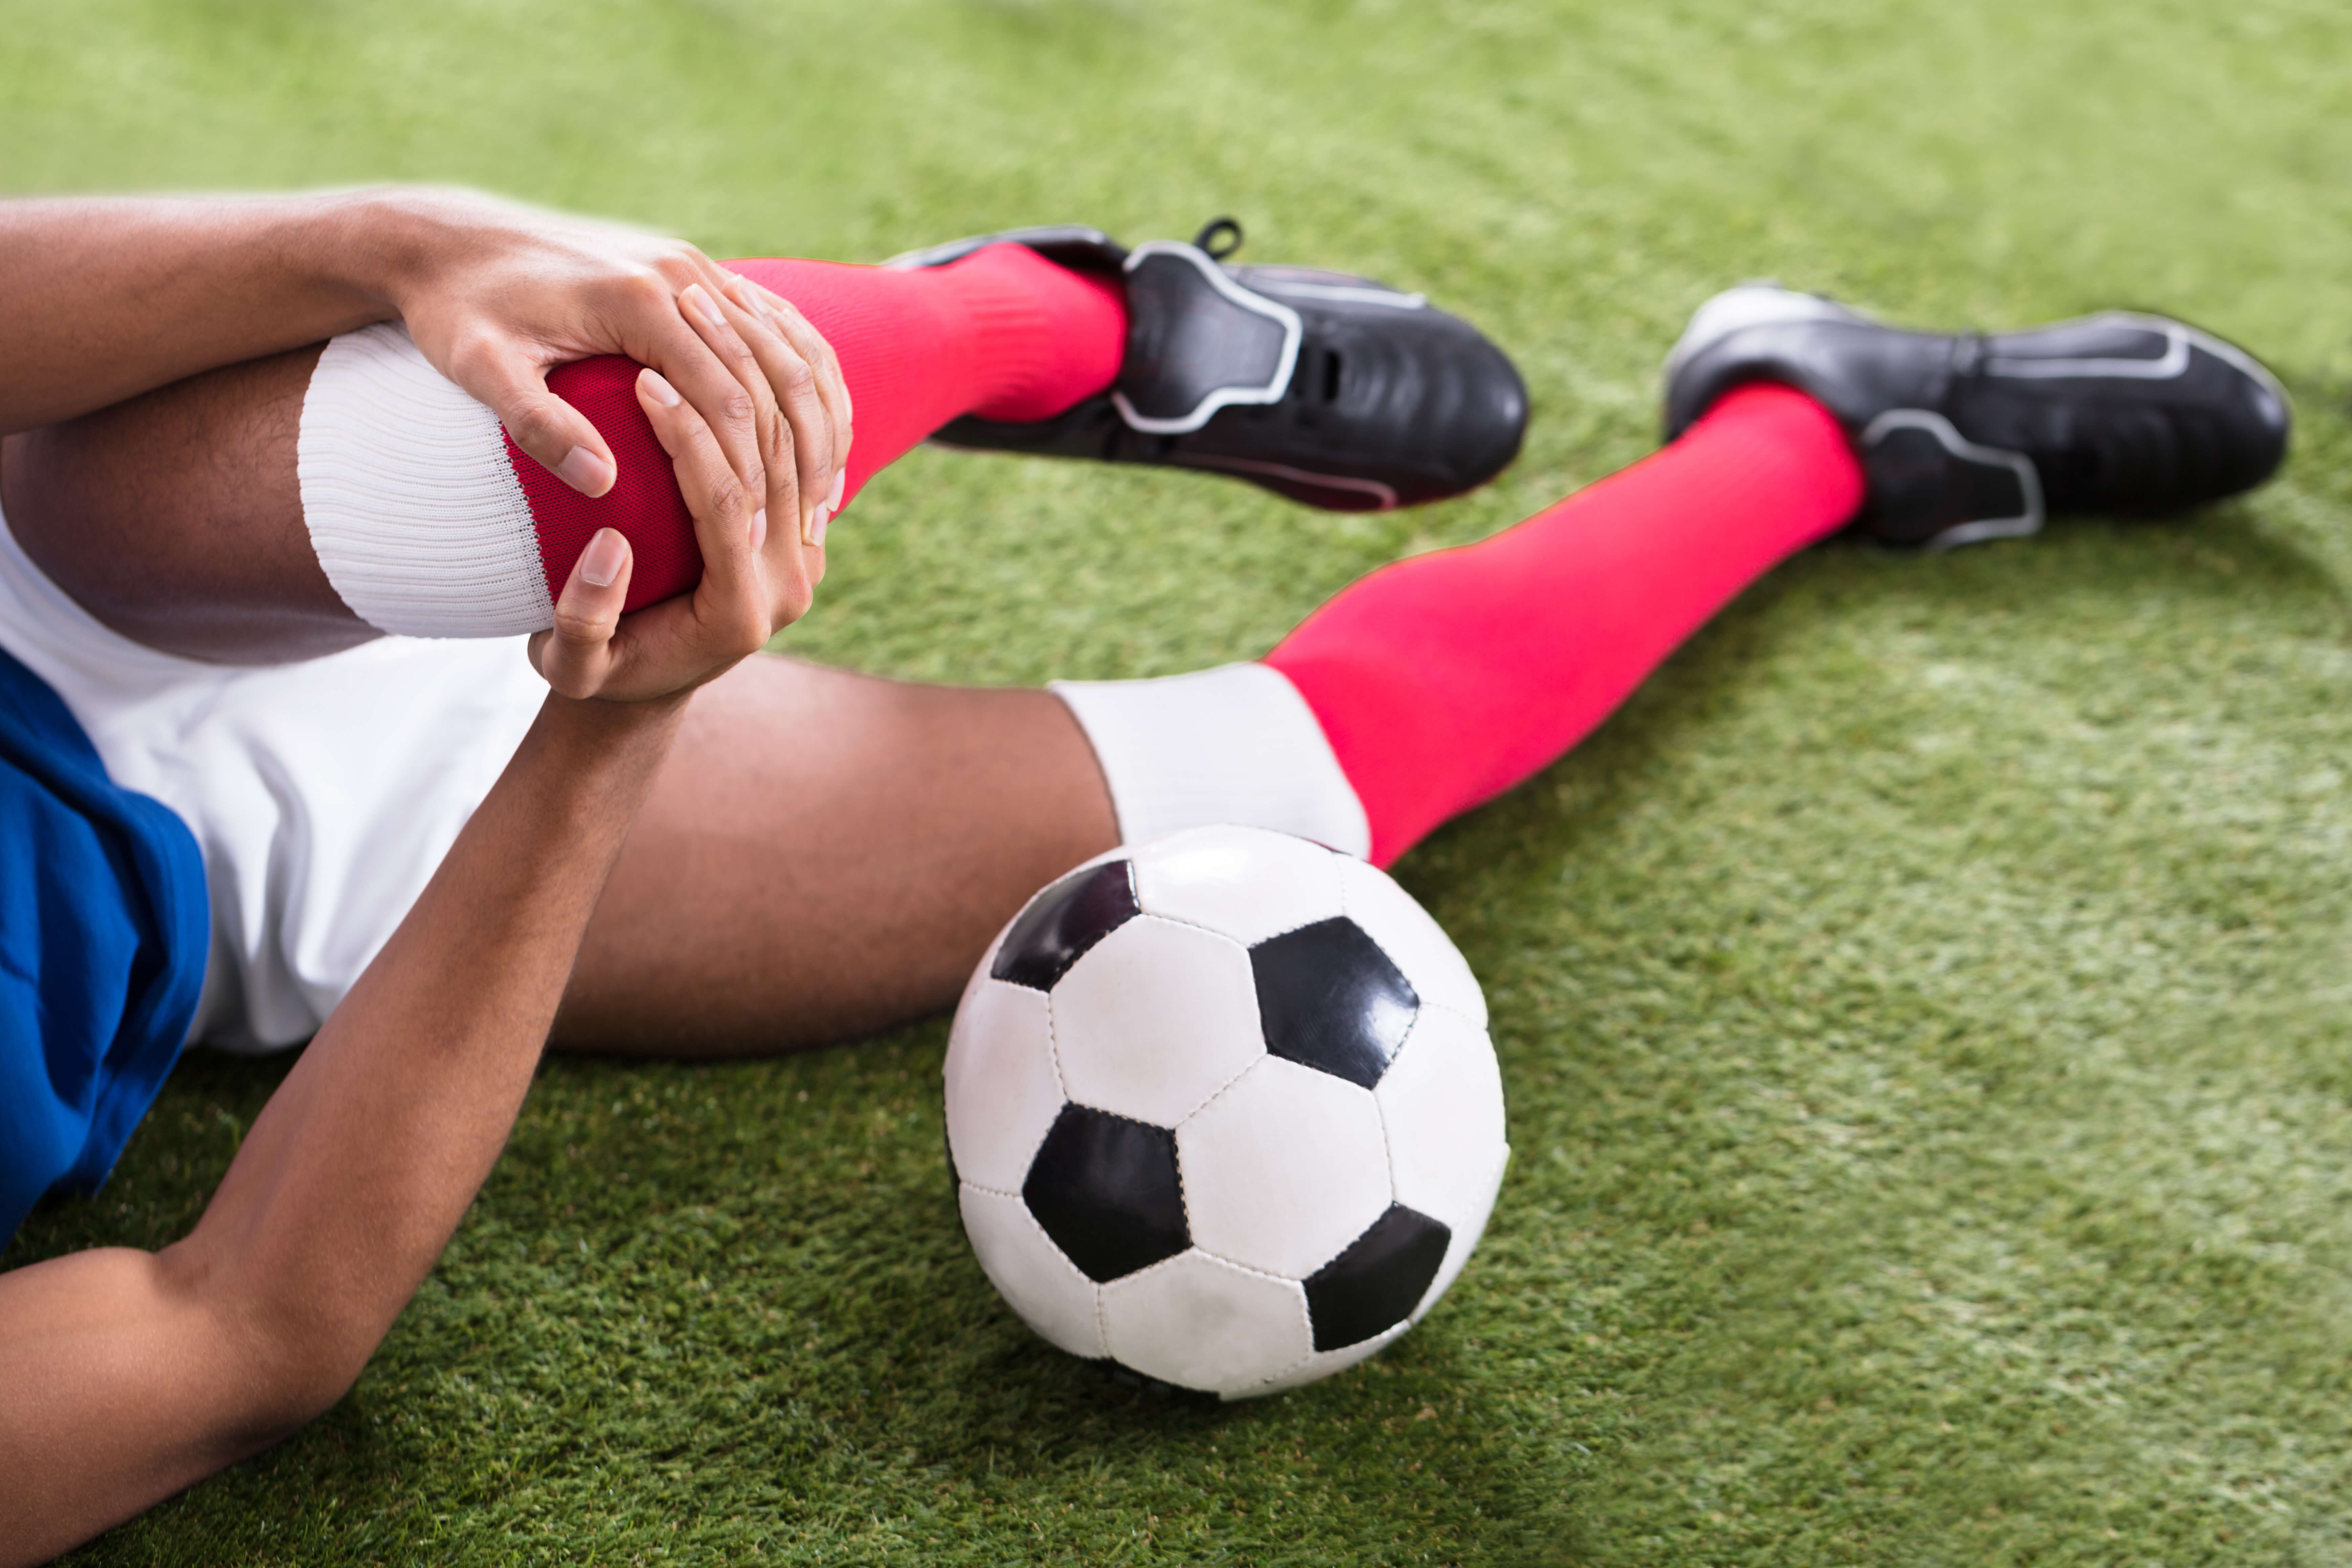 Causes of ACL Injuries